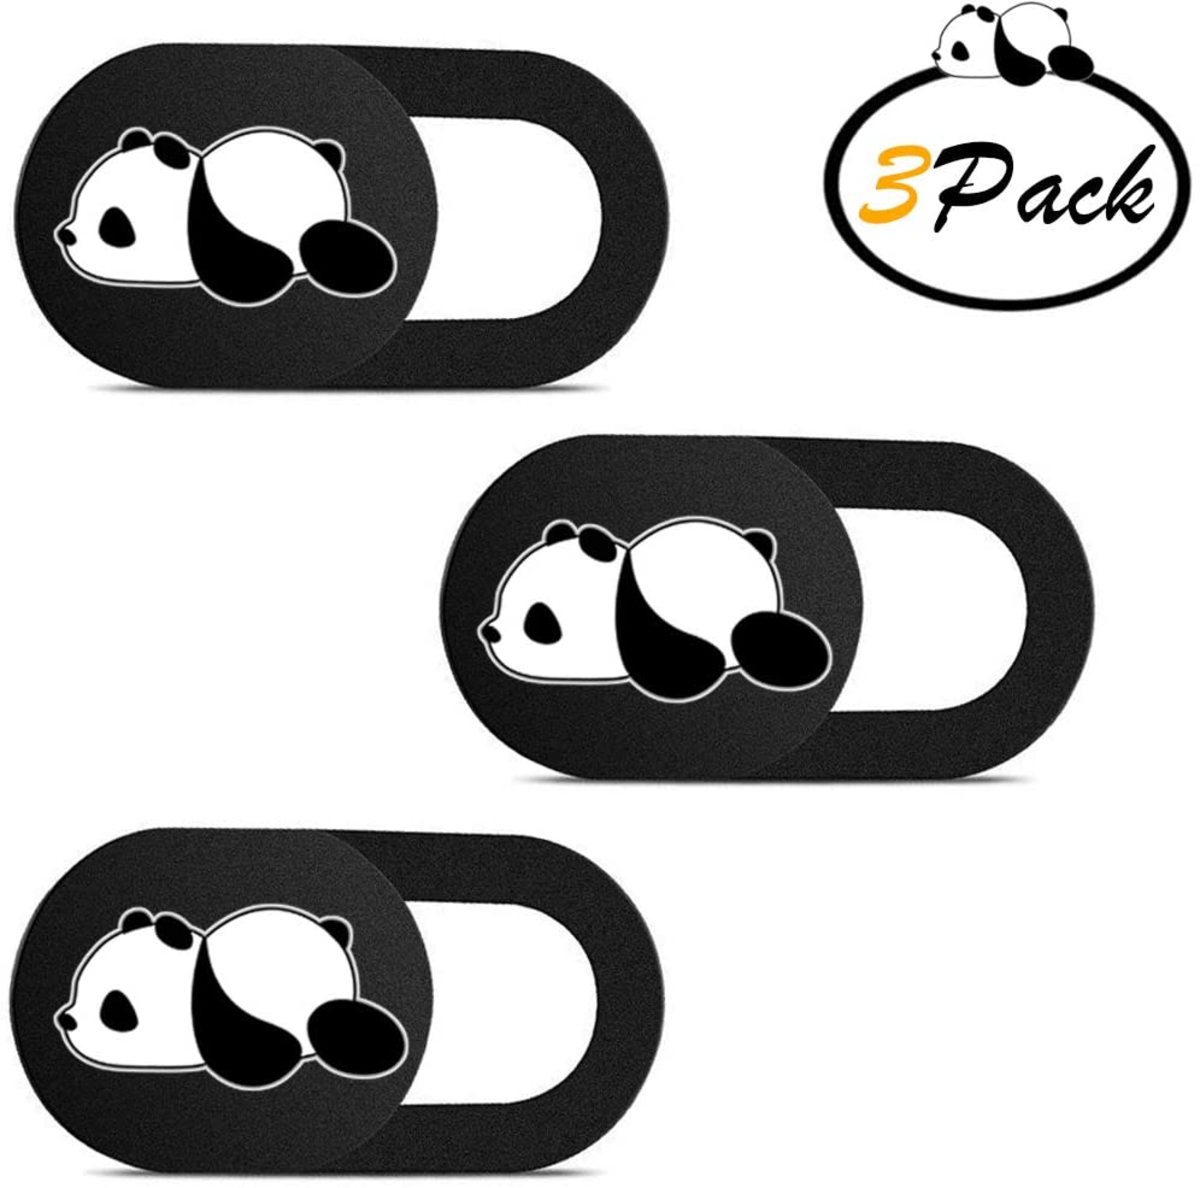 The Cute Panda Webcam Cover Slide is simply adorable and makes a great gift for relatives, friends, and coworkers, in my experience.